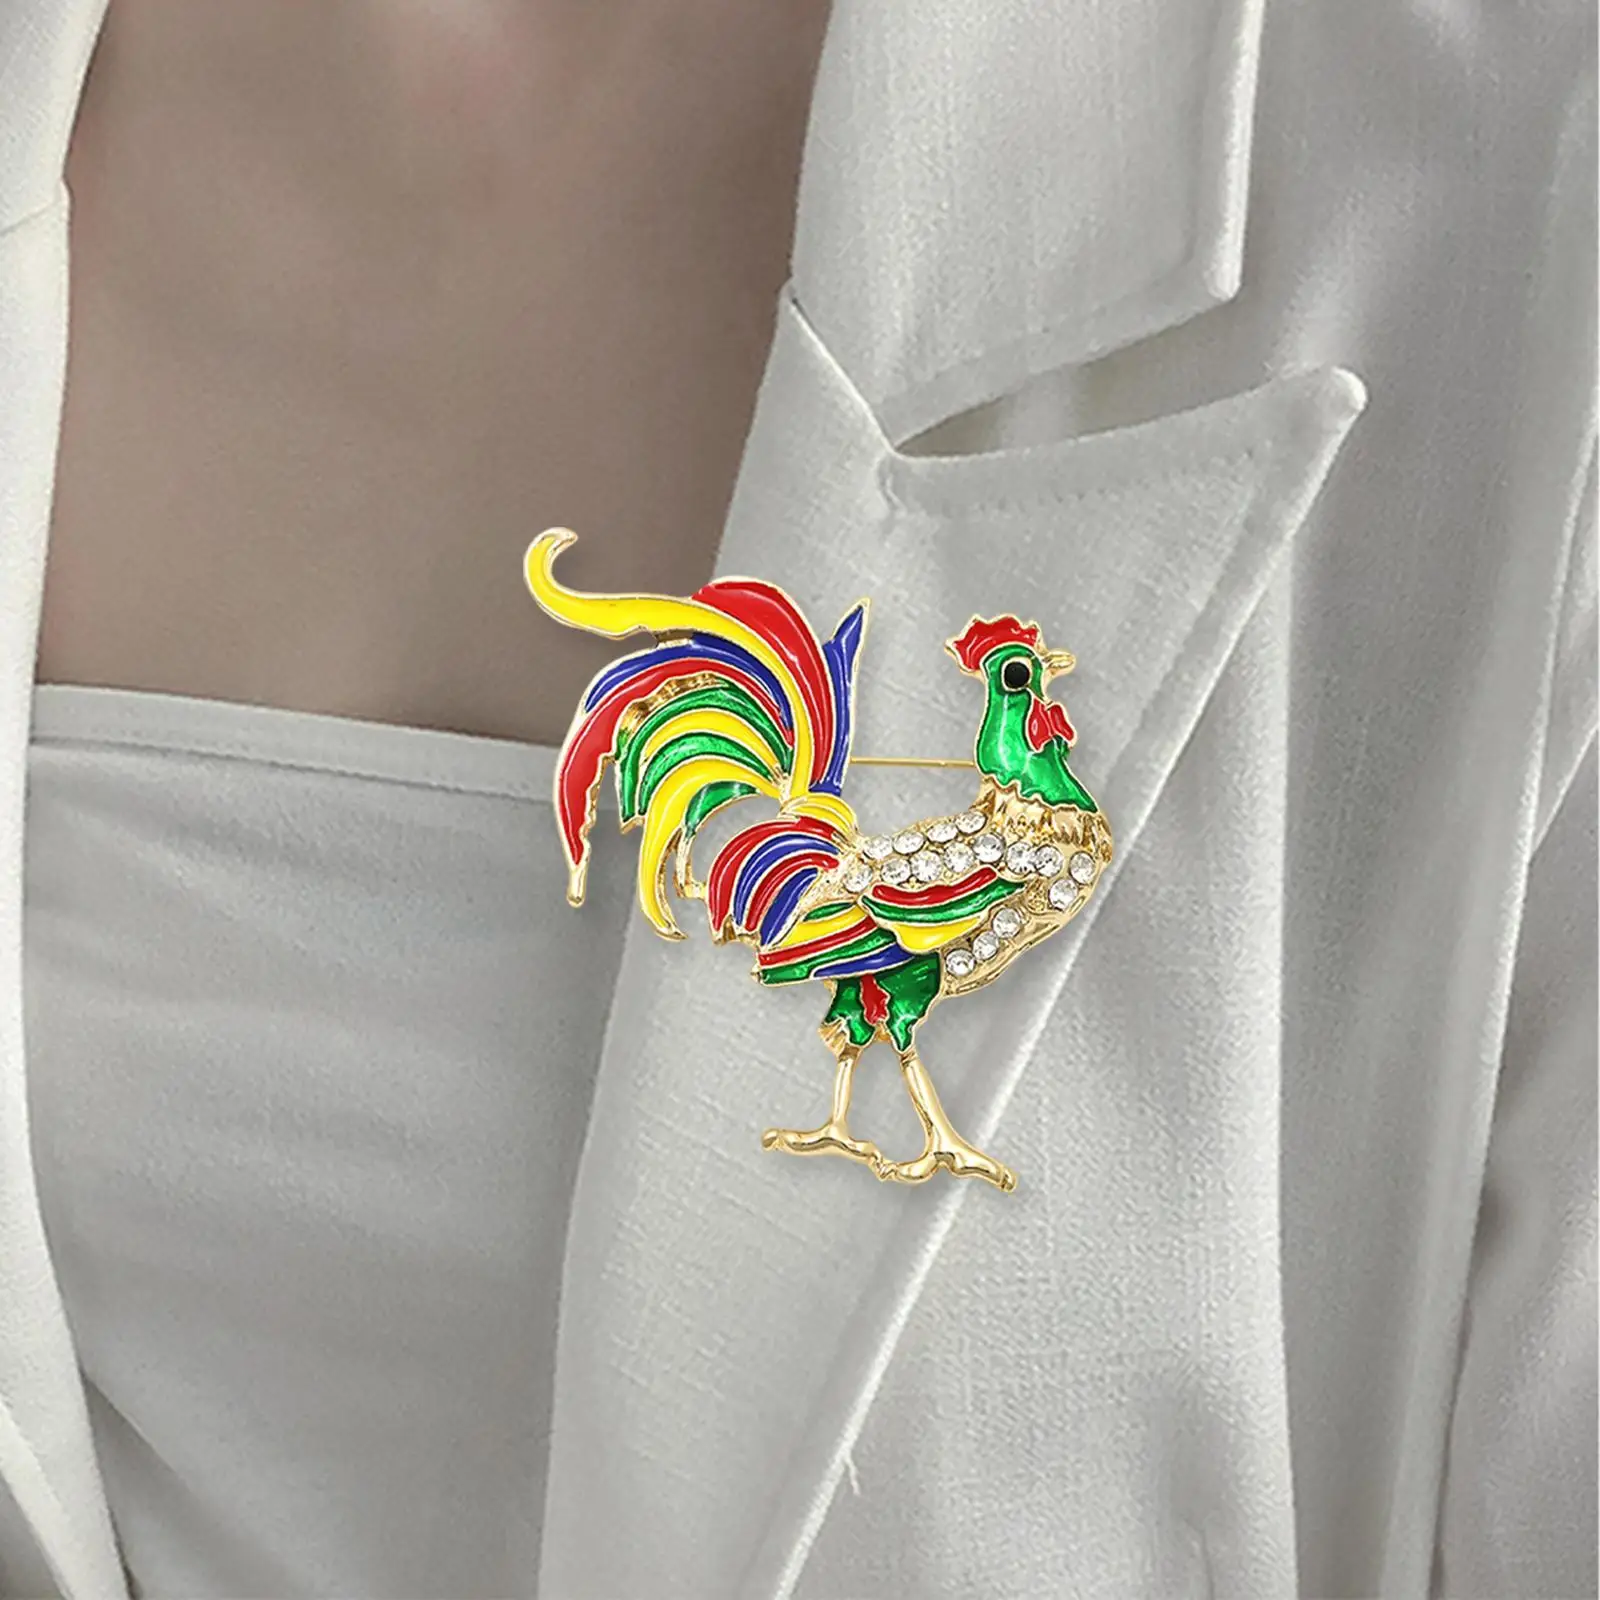 Trendy Brooch Pin Badge Corsage Ornament Decor Dress Accessories Gift Delicate Chicken Lapel Pin for Jackets Coat Shirt Bags Hat